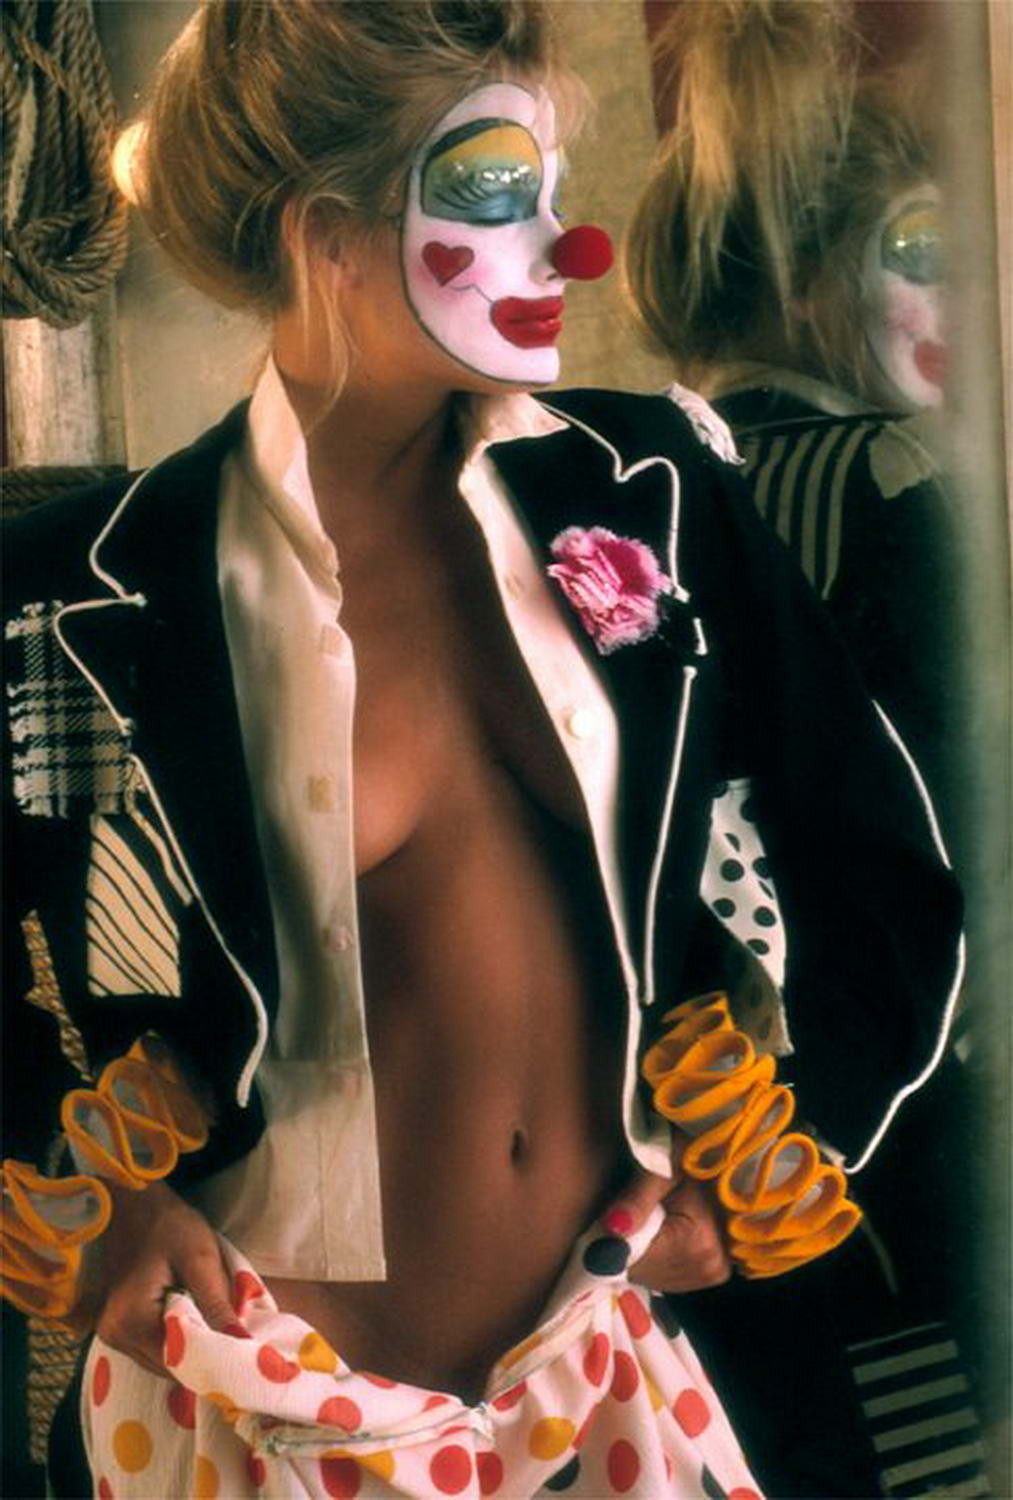 Hot blonde play mate in a clown suit #71249000